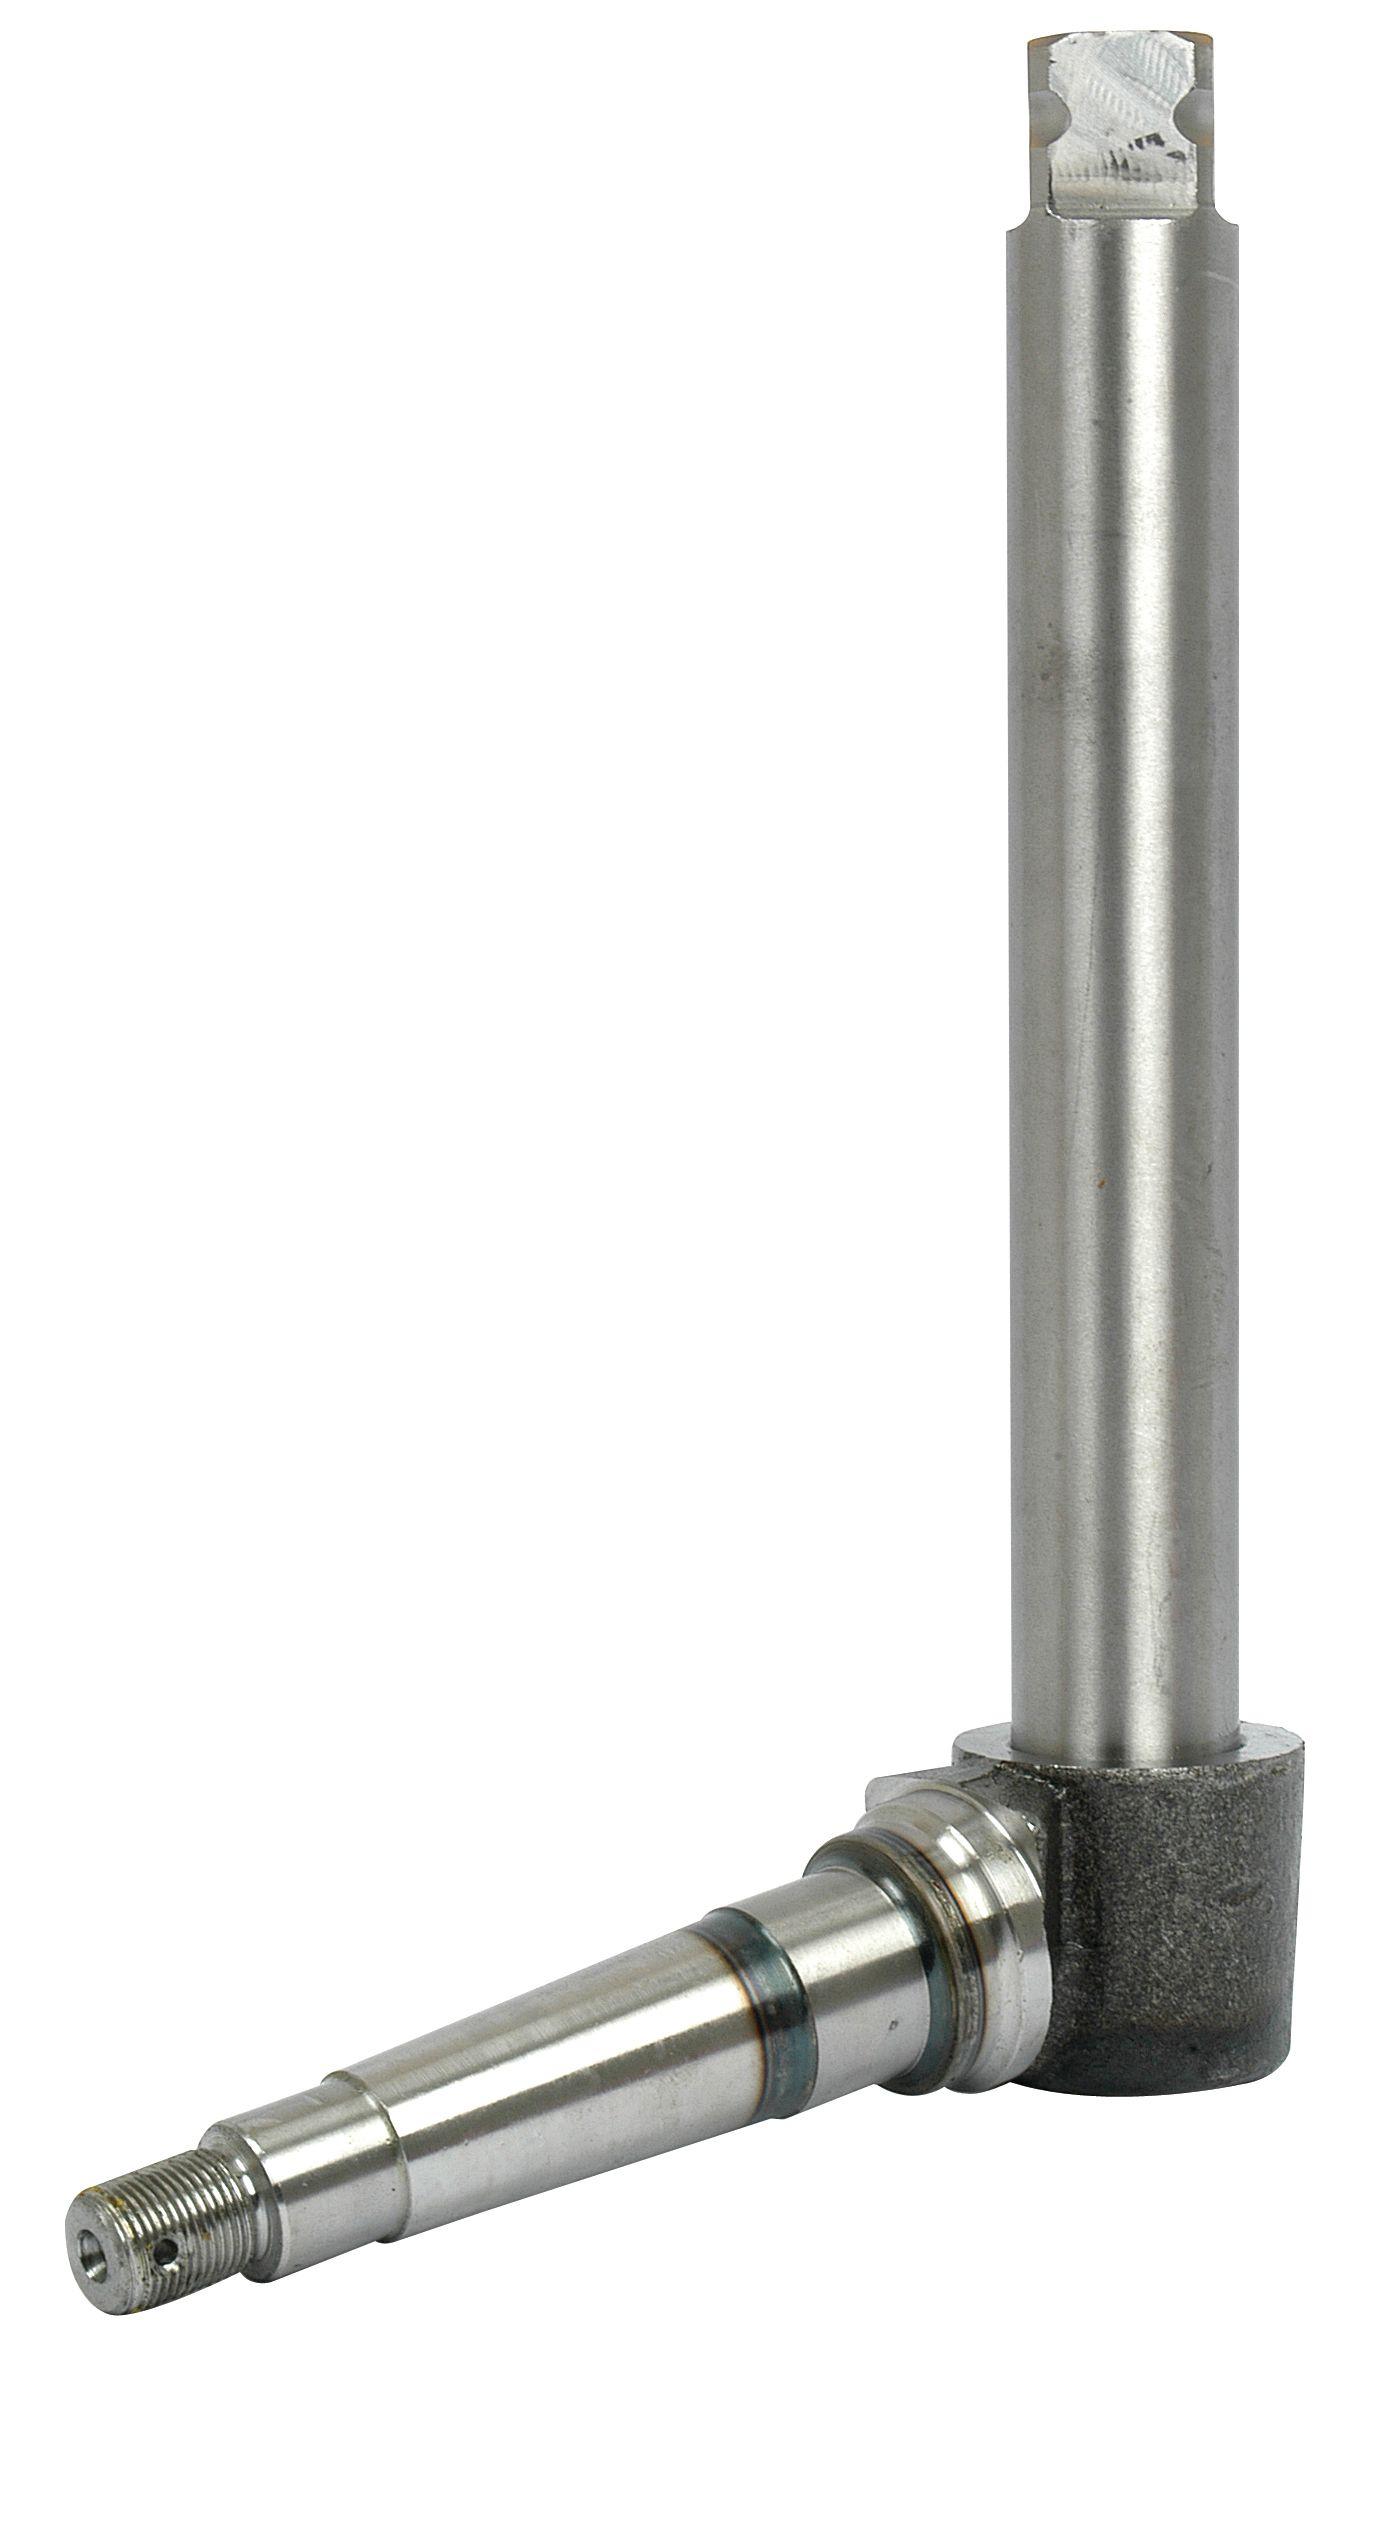 FIAT SPINDLE-LH 61197